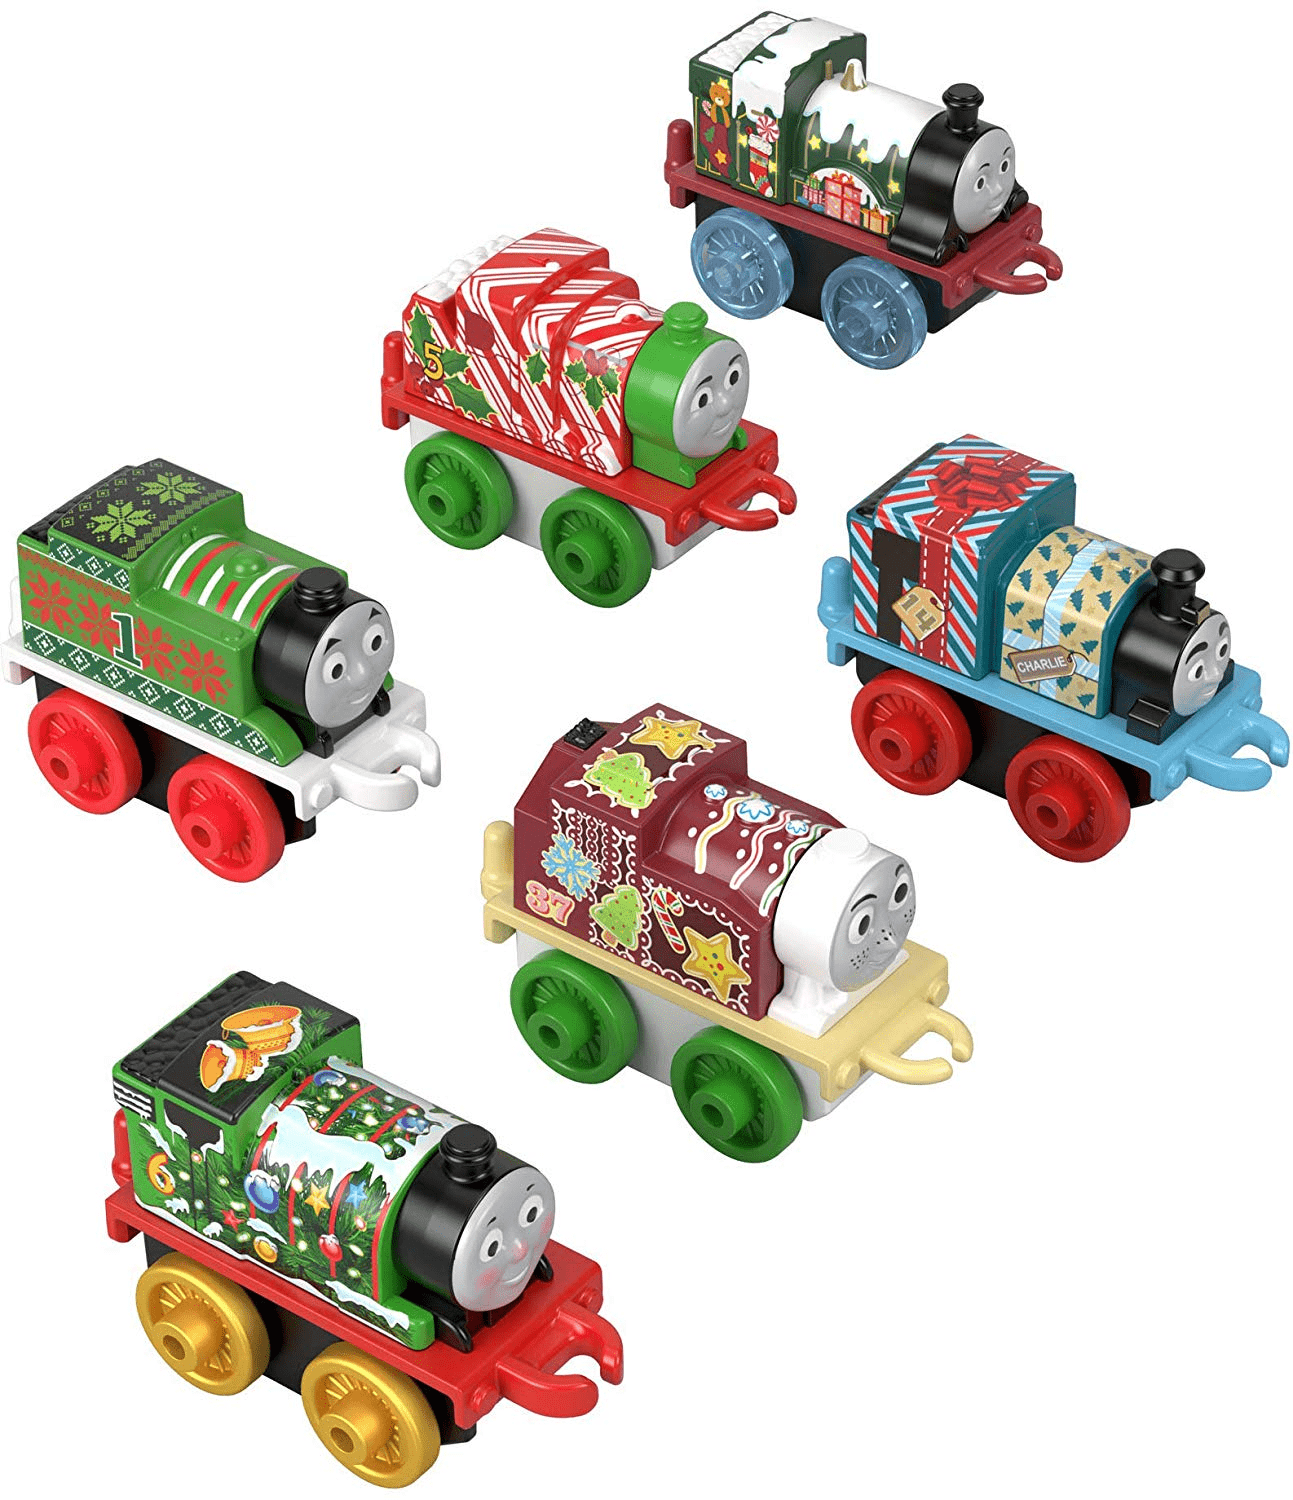 2018 Fisher Price Thomas Friends Minis Advent Calendar Available